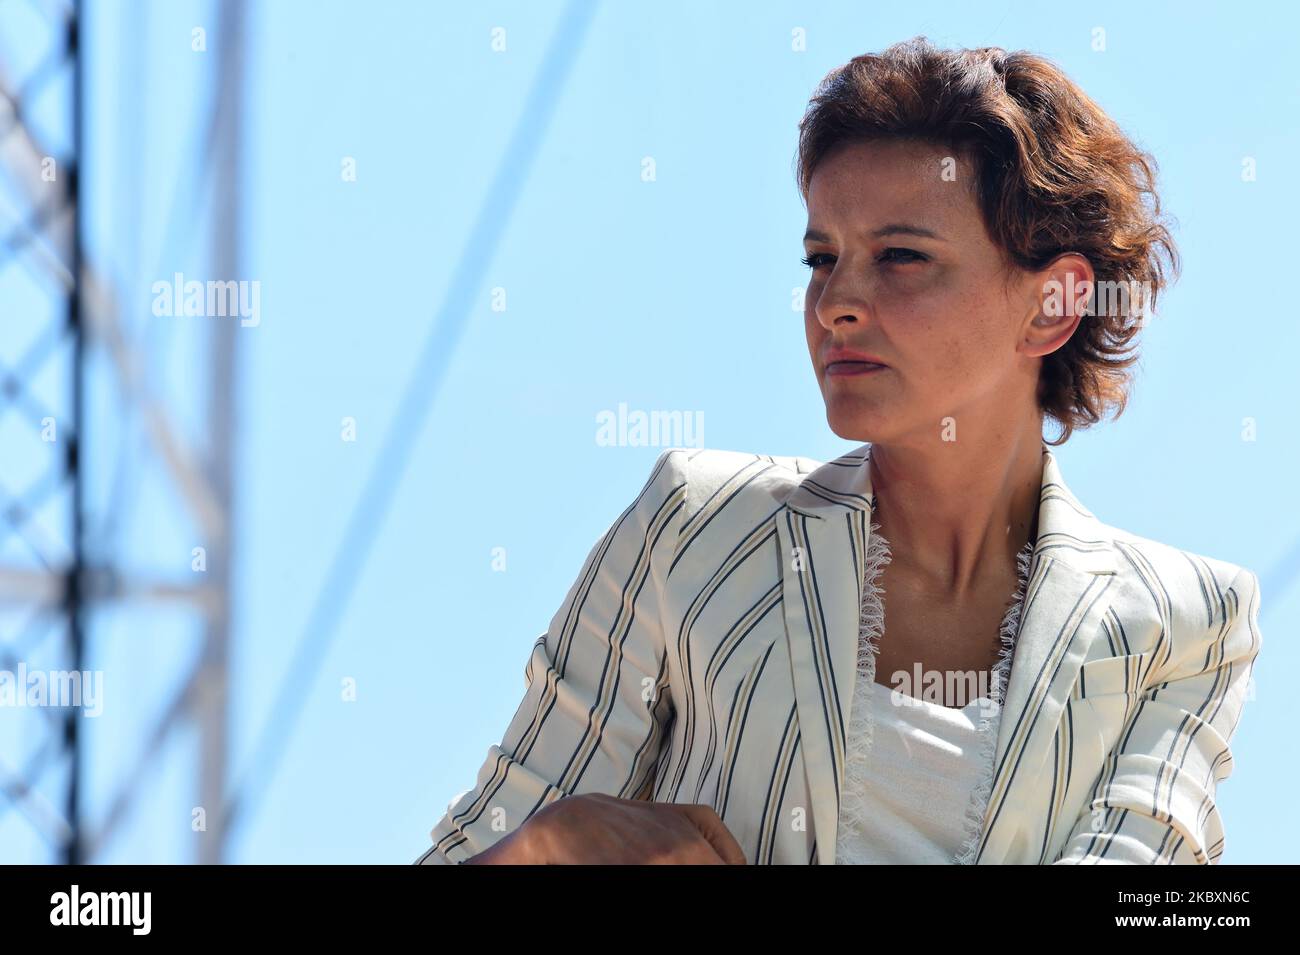 Former French Education Minister Najat Vallaud-Belkacem attends at the meeting of French employers' association Medef themed 'The Renaissance of French Companies' on August 27, 2020, in Paris, France. (Photo by Daniel Pier/NurPhoto) Stock Photo